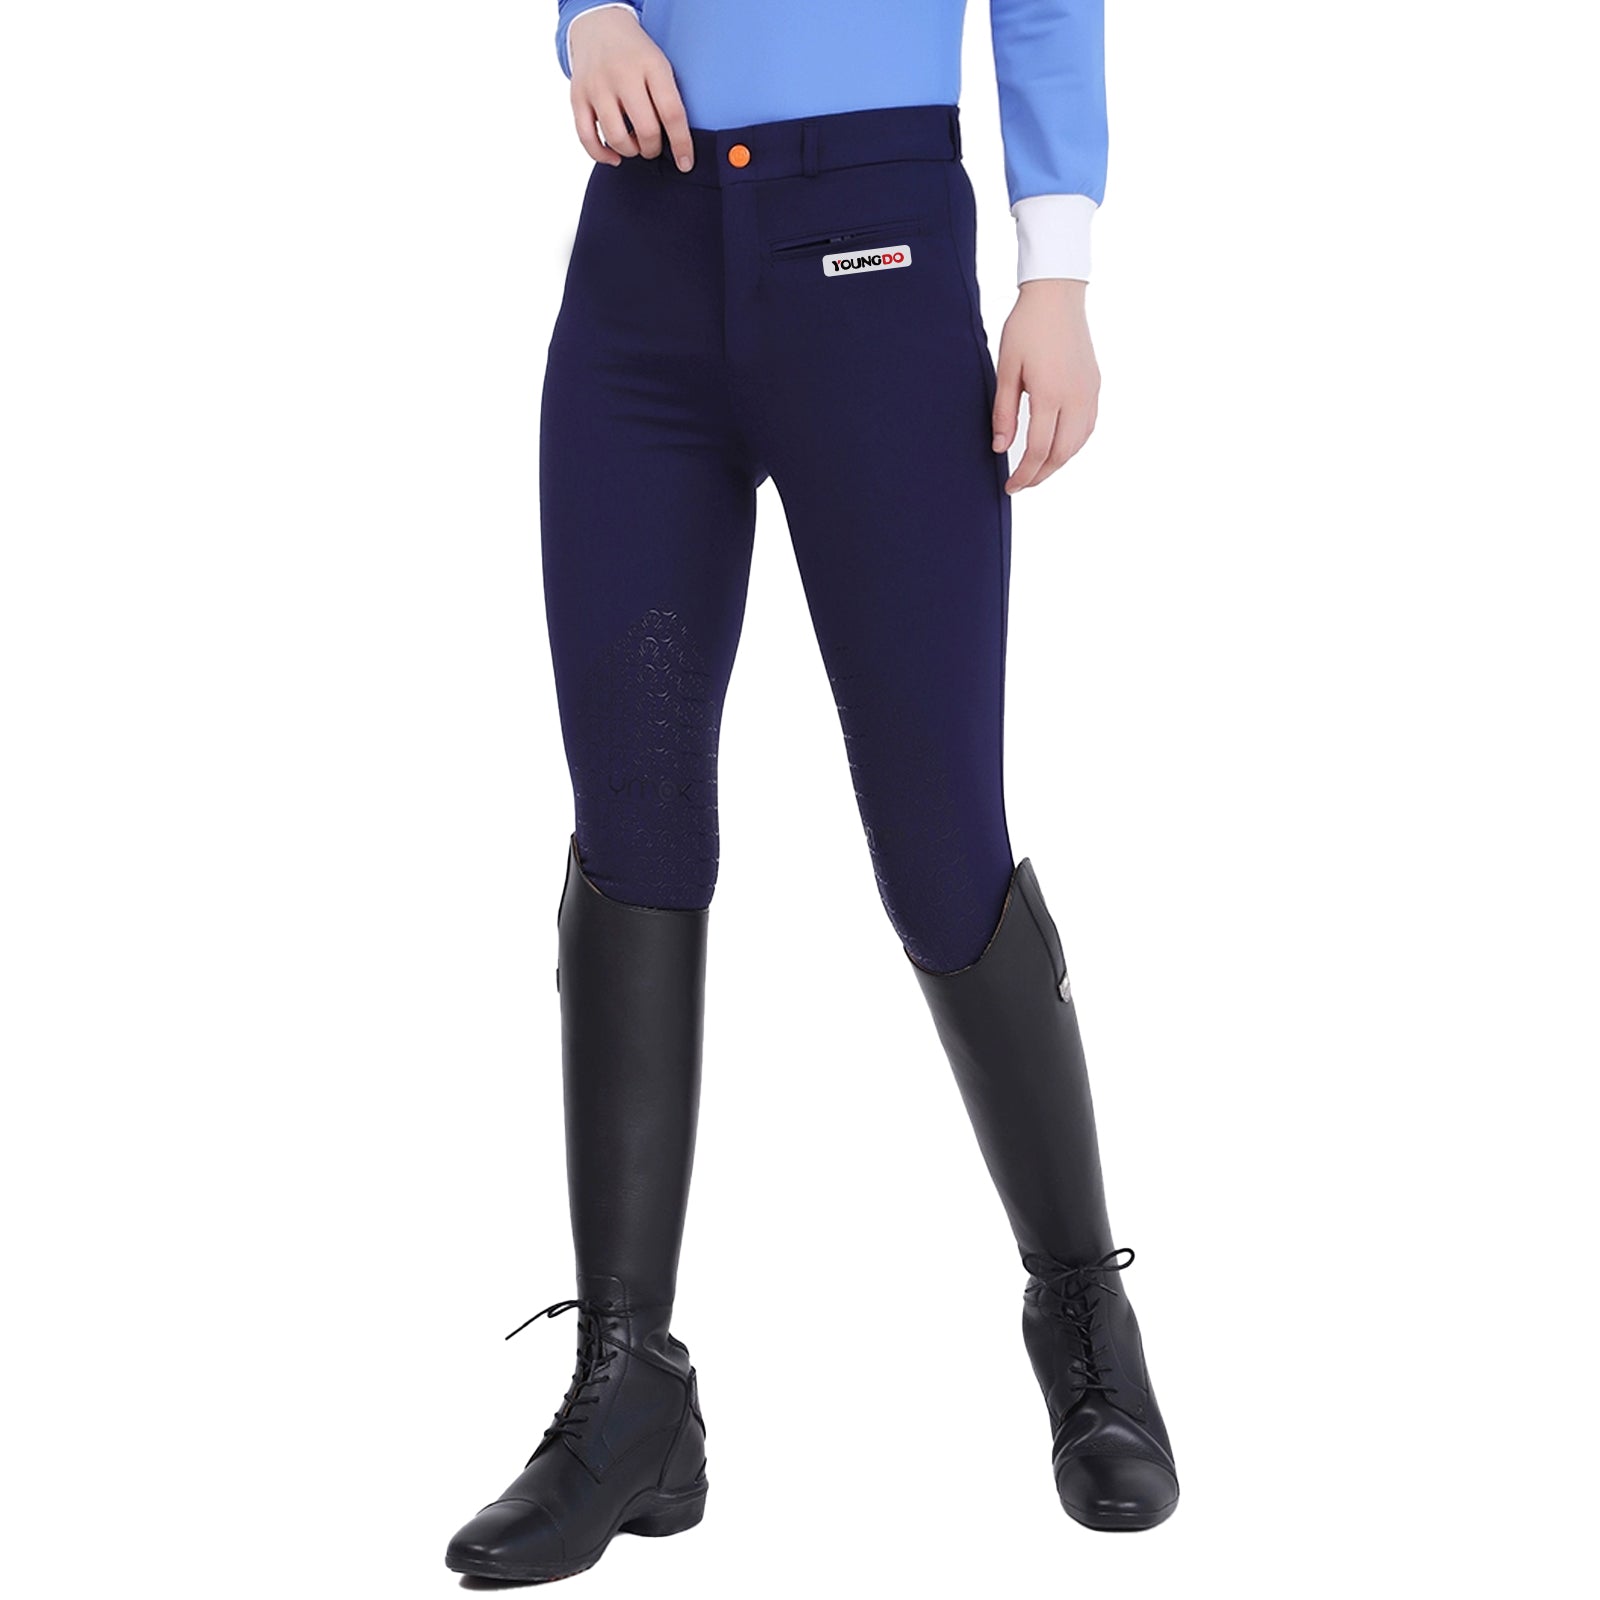 YOUNGDO equestrian pants for women, riding breeches for women, Jodhpurs for horse riding